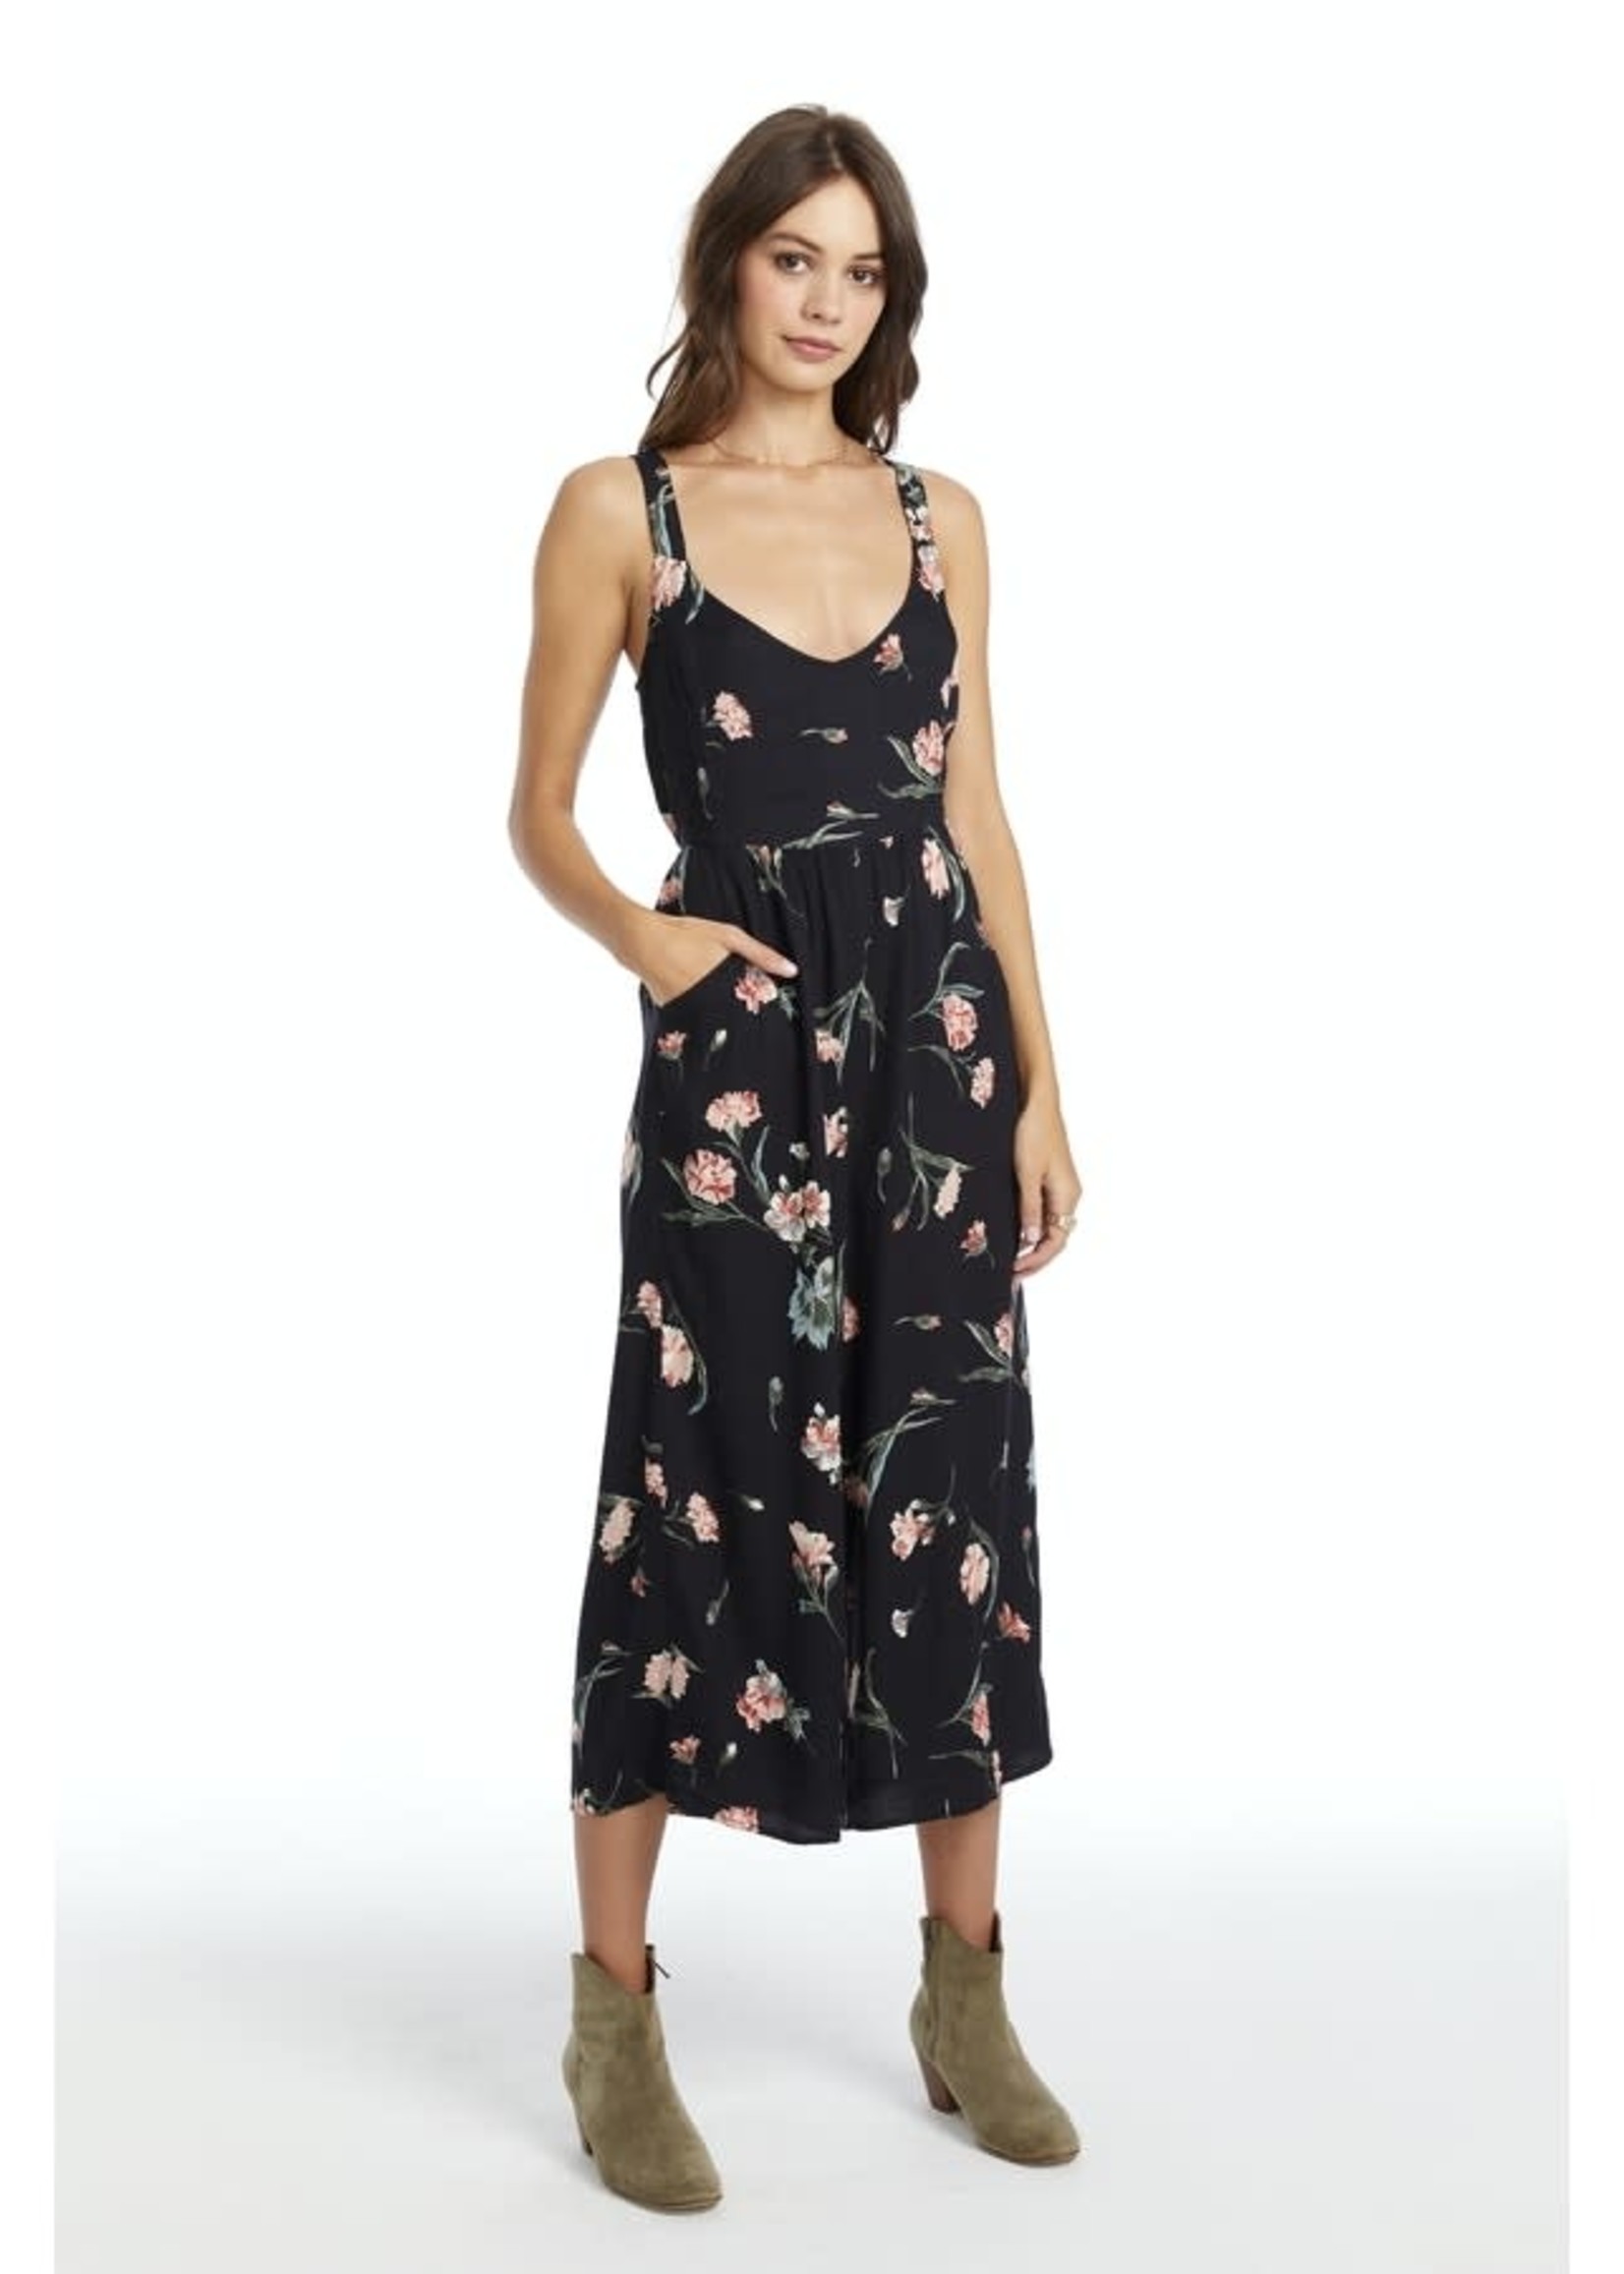 SALTWATER LUXE LUCY floral romper